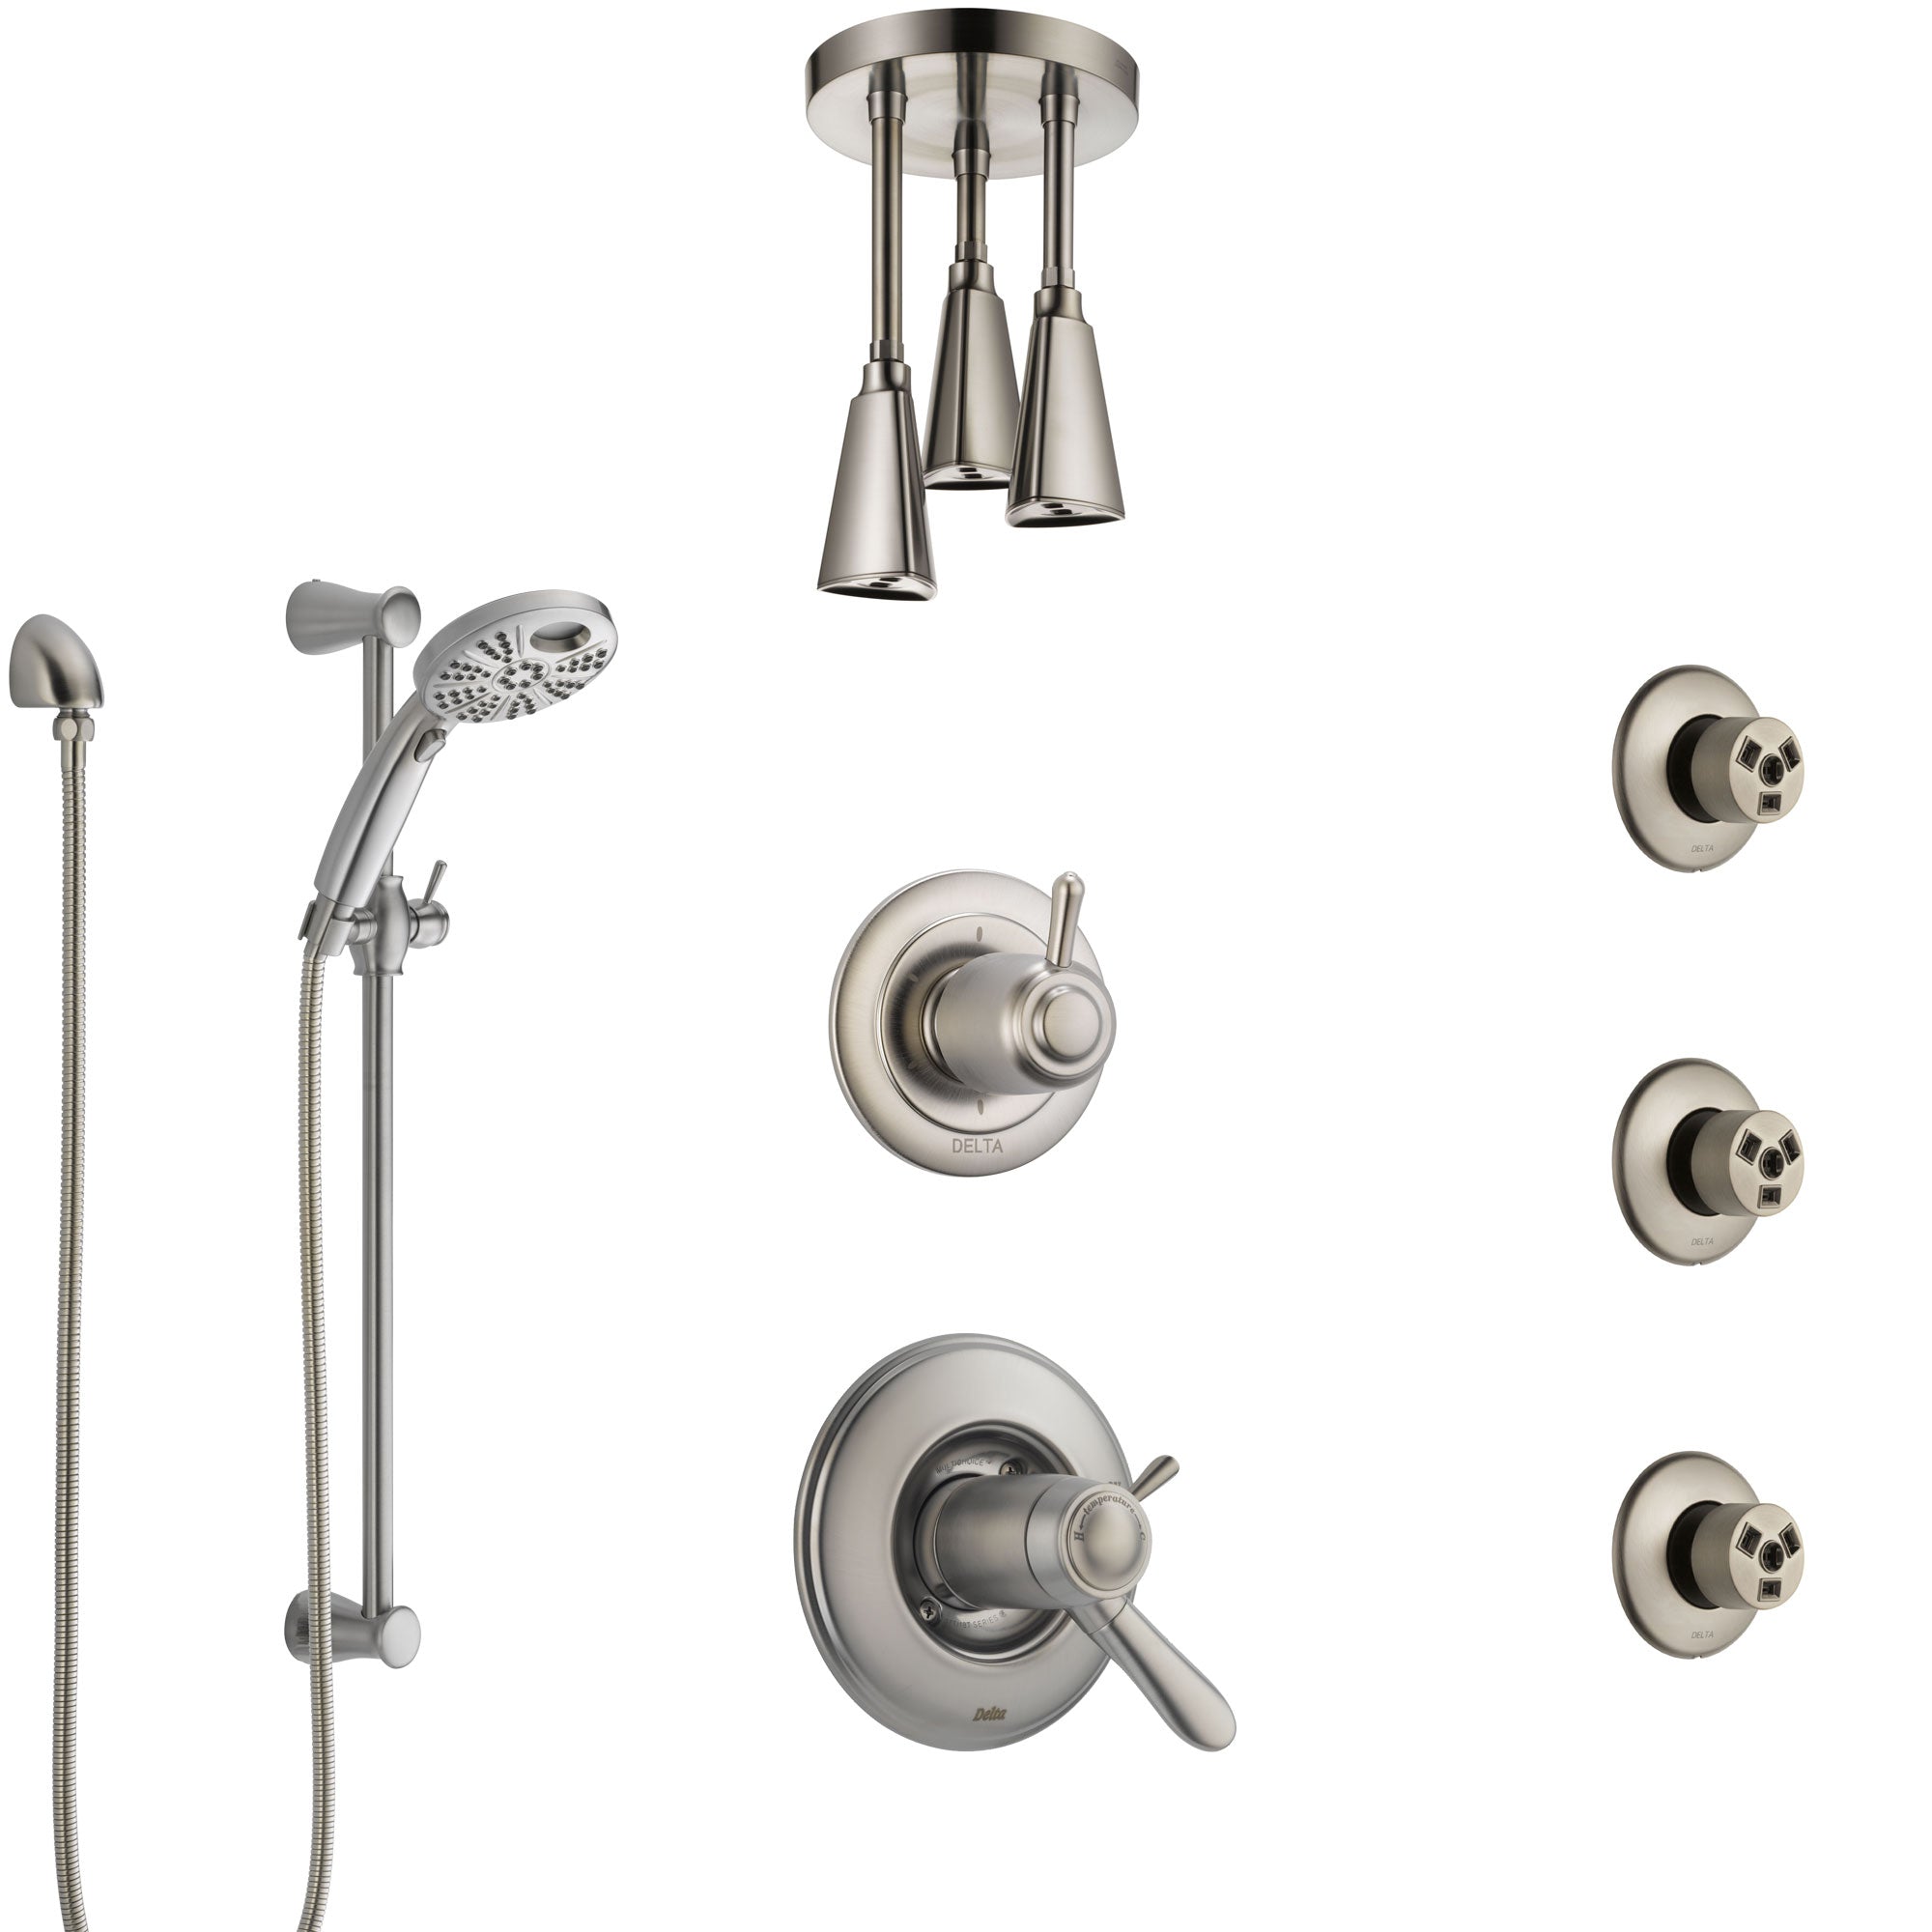 Delta Lahara Thermostatic Control Stainless Steel Finish Shower System, Diverter, Ceiling Showerhead, 3 Body Sprays, & Temp2O Hand Shower SS17T382SS4